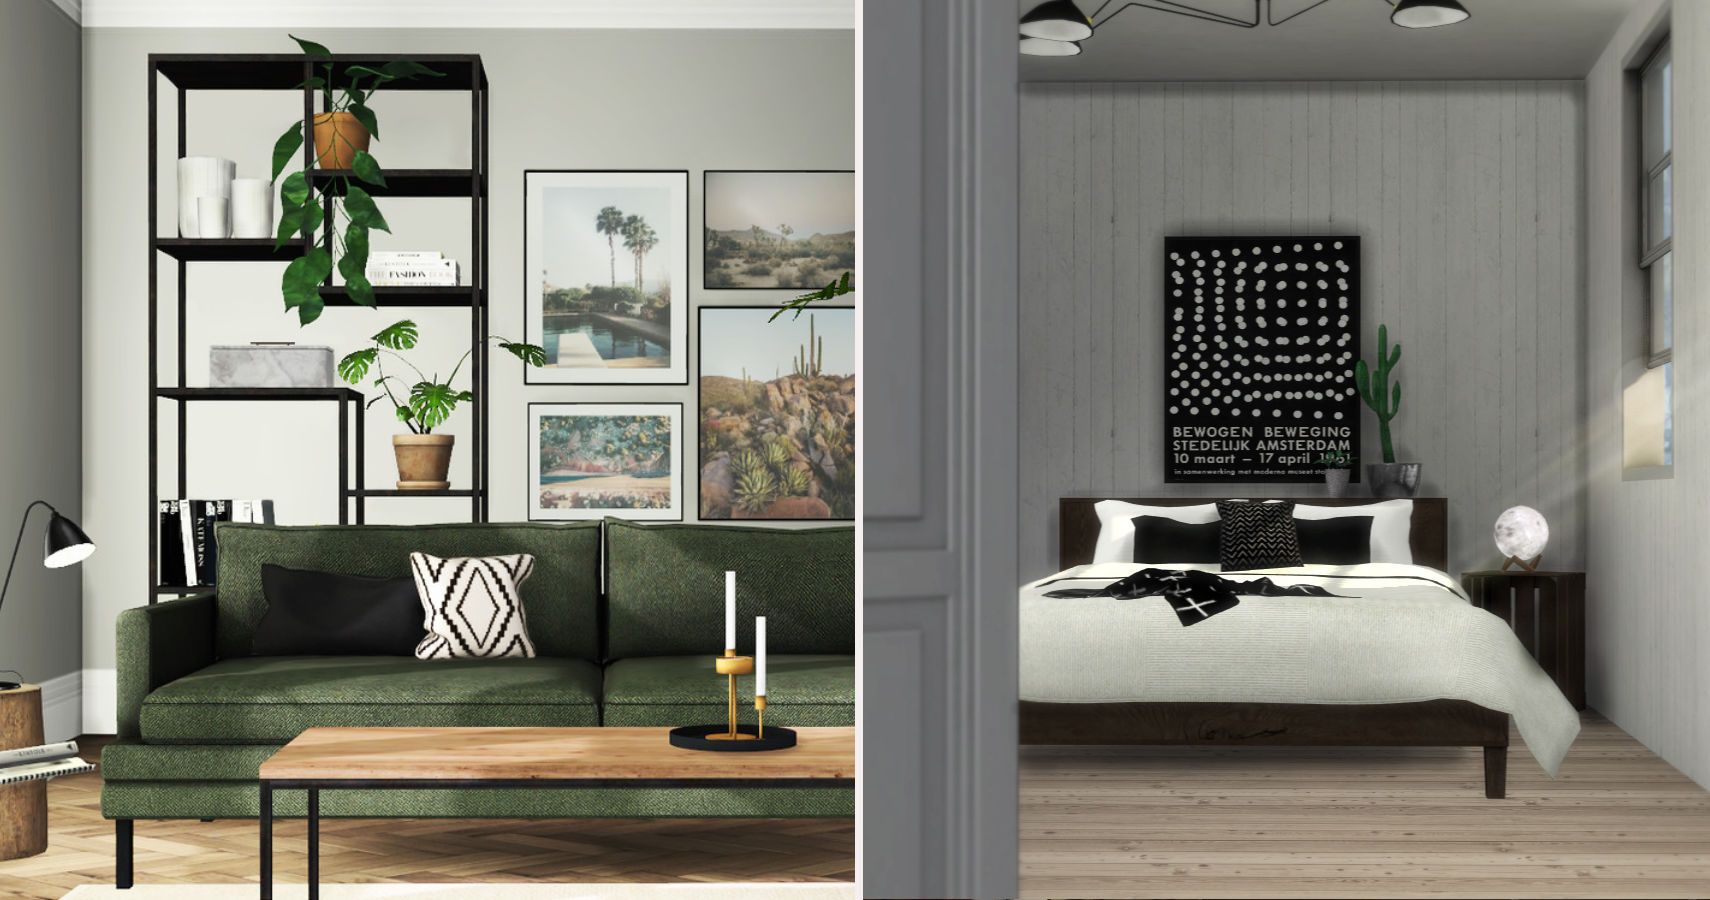 Left side a modern living room wth sofa, table and wall art. Right side a modern bed with wall decor and lighting.